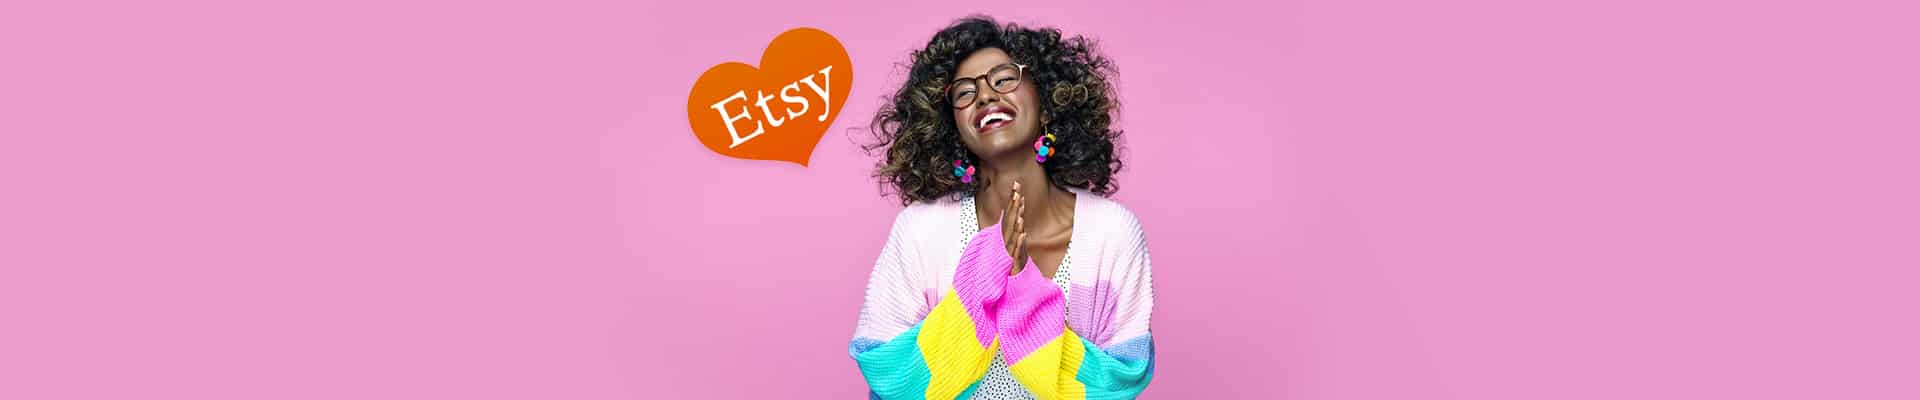 HOW TO SELL ON ETSY: A STEP-BY-STEP GUIDE FOR BEGINNERS